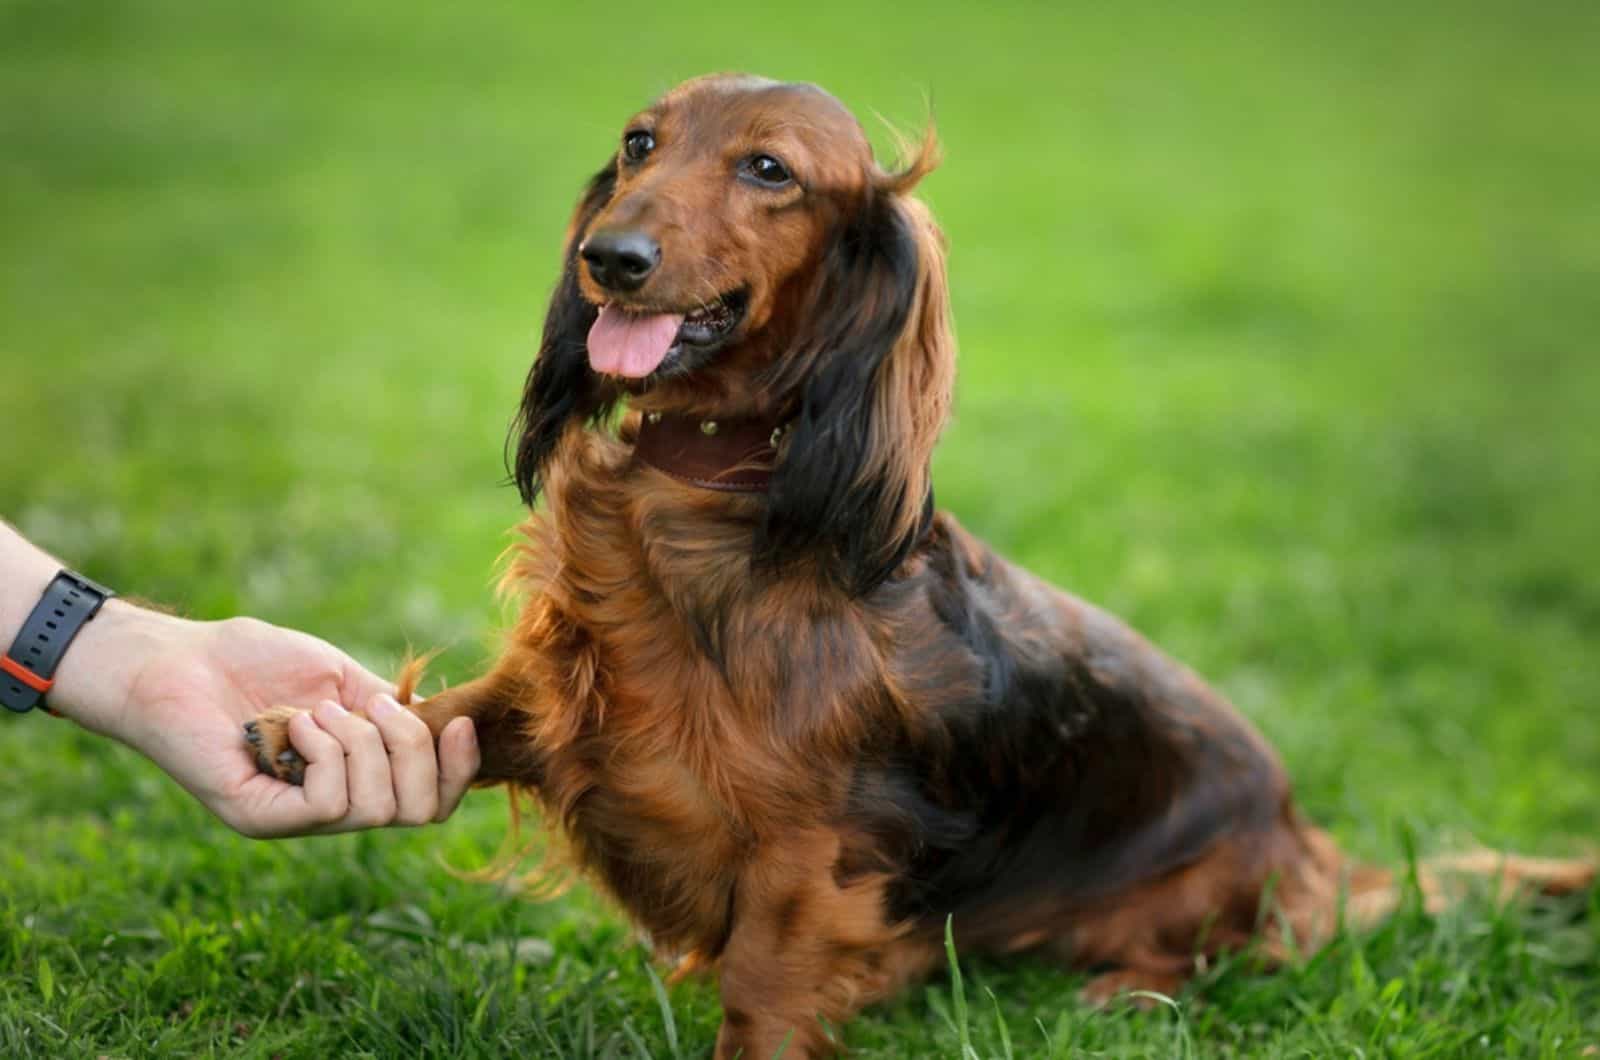 dachshund dog gives his paw to a man in the park